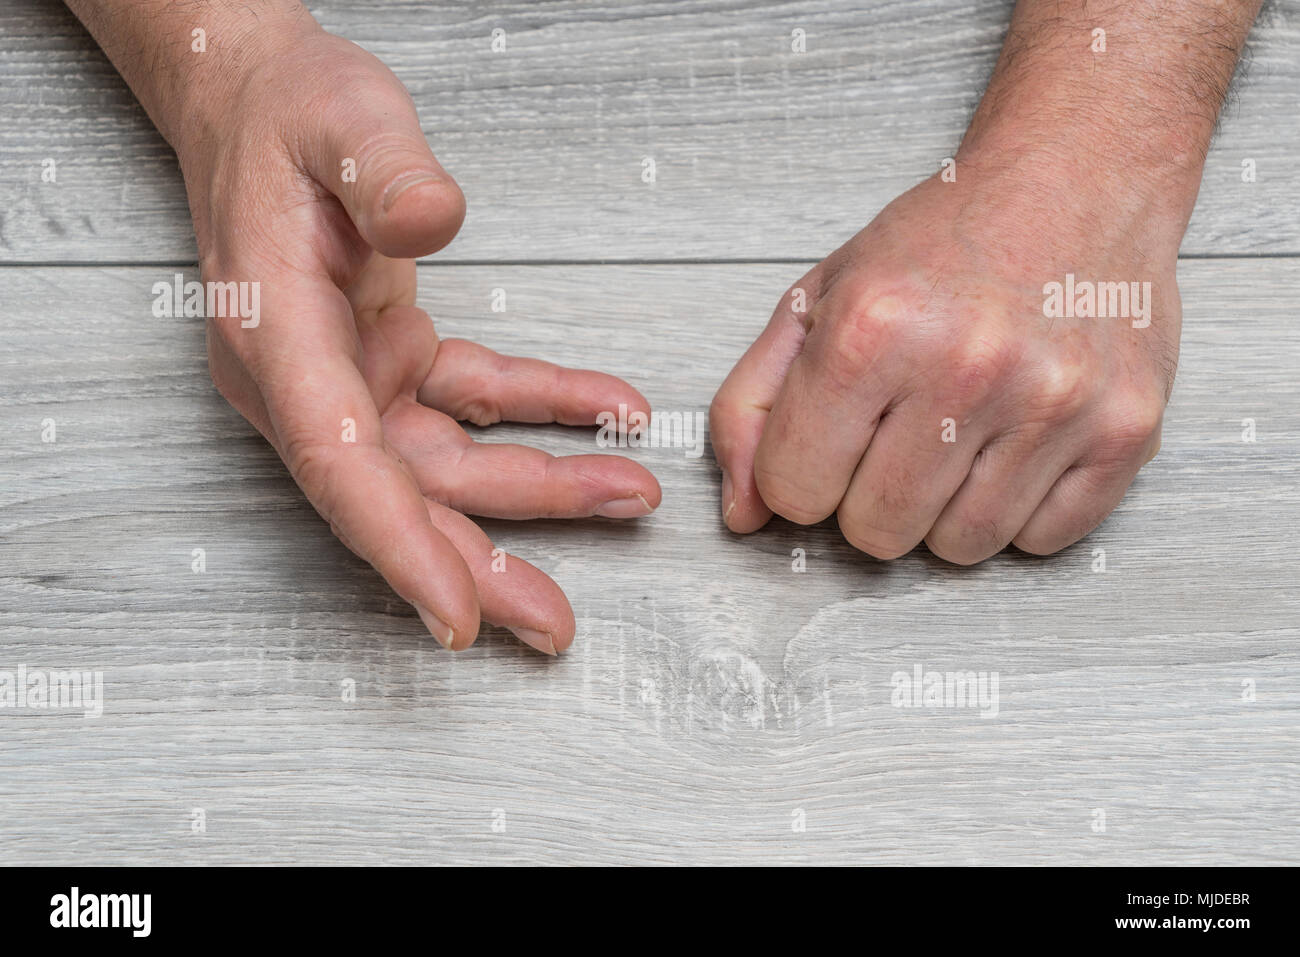 the gesture of a man's hands during an argument Stock Photo